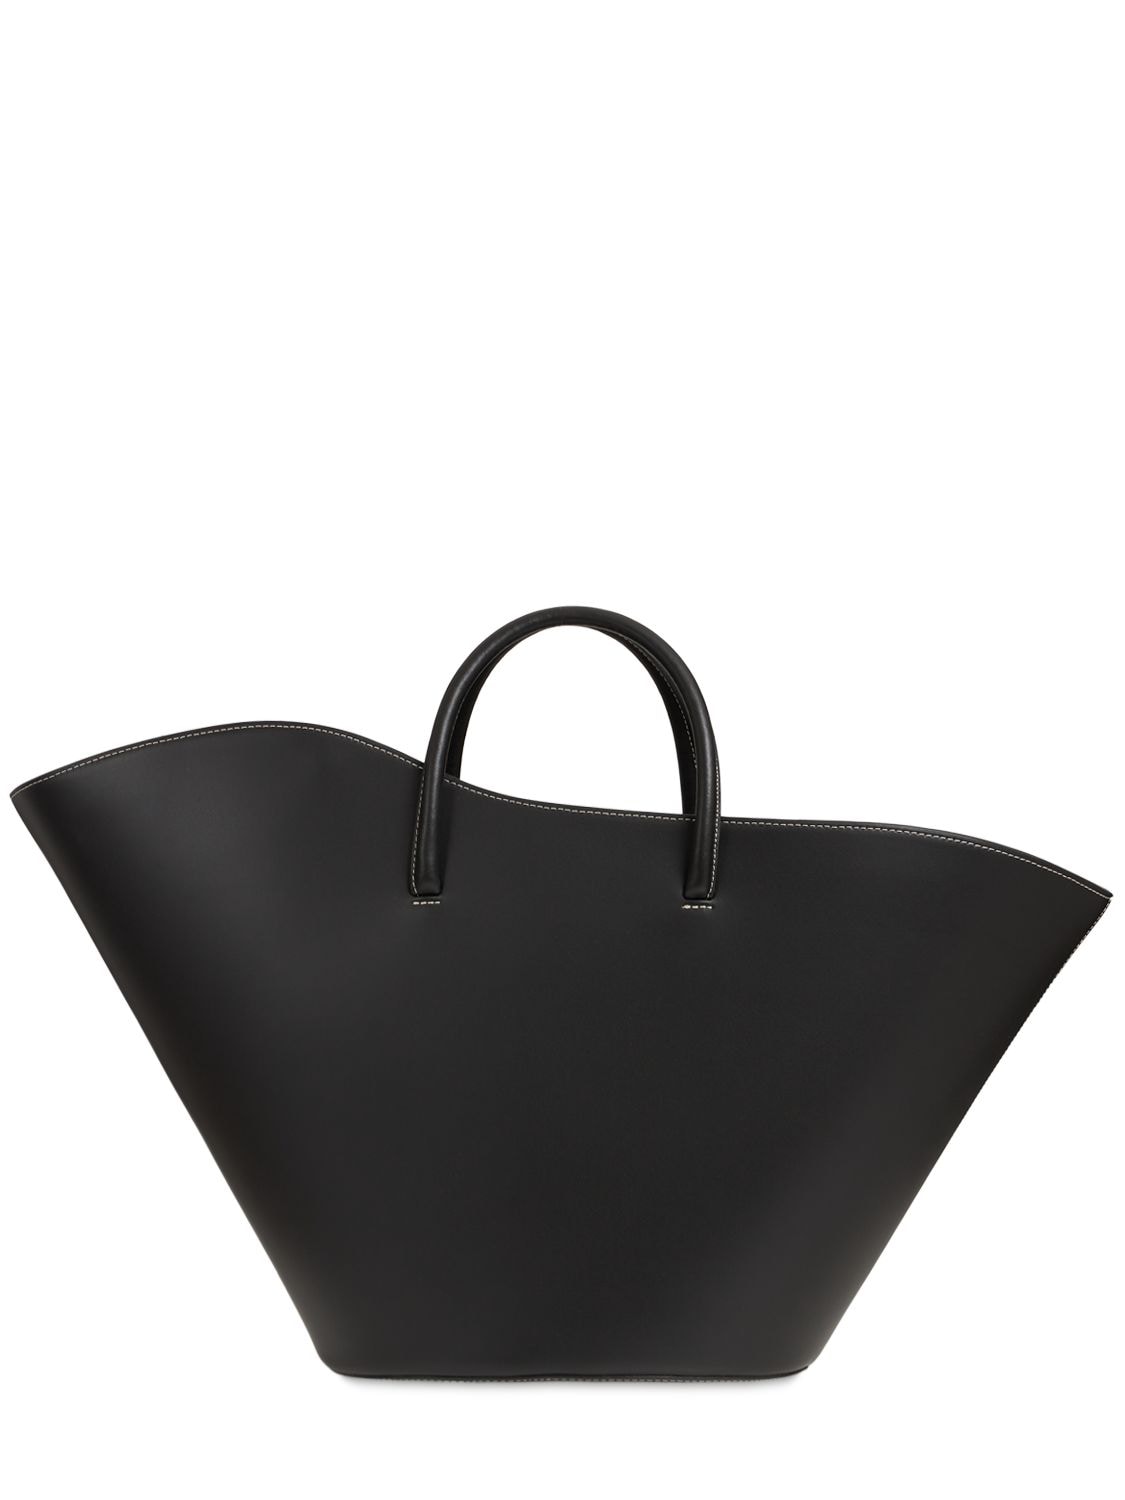 LITTLE LIFFNER Large Tulip Leather Tote Bag